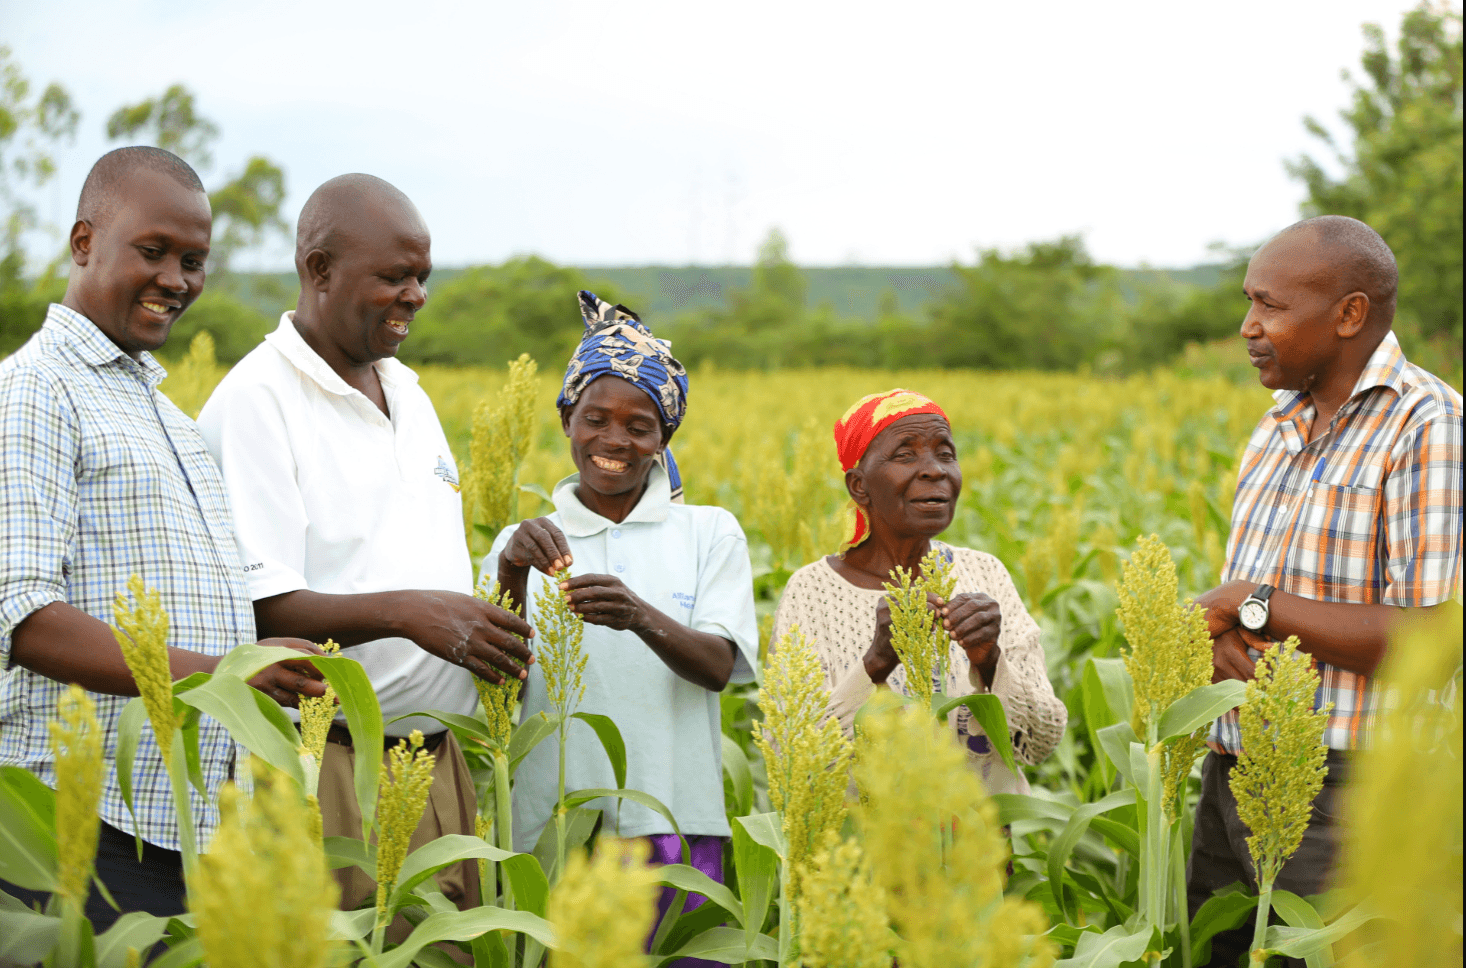 Launch Of Smallholder Farmer Challenges For Diageo Sustainable Solutions